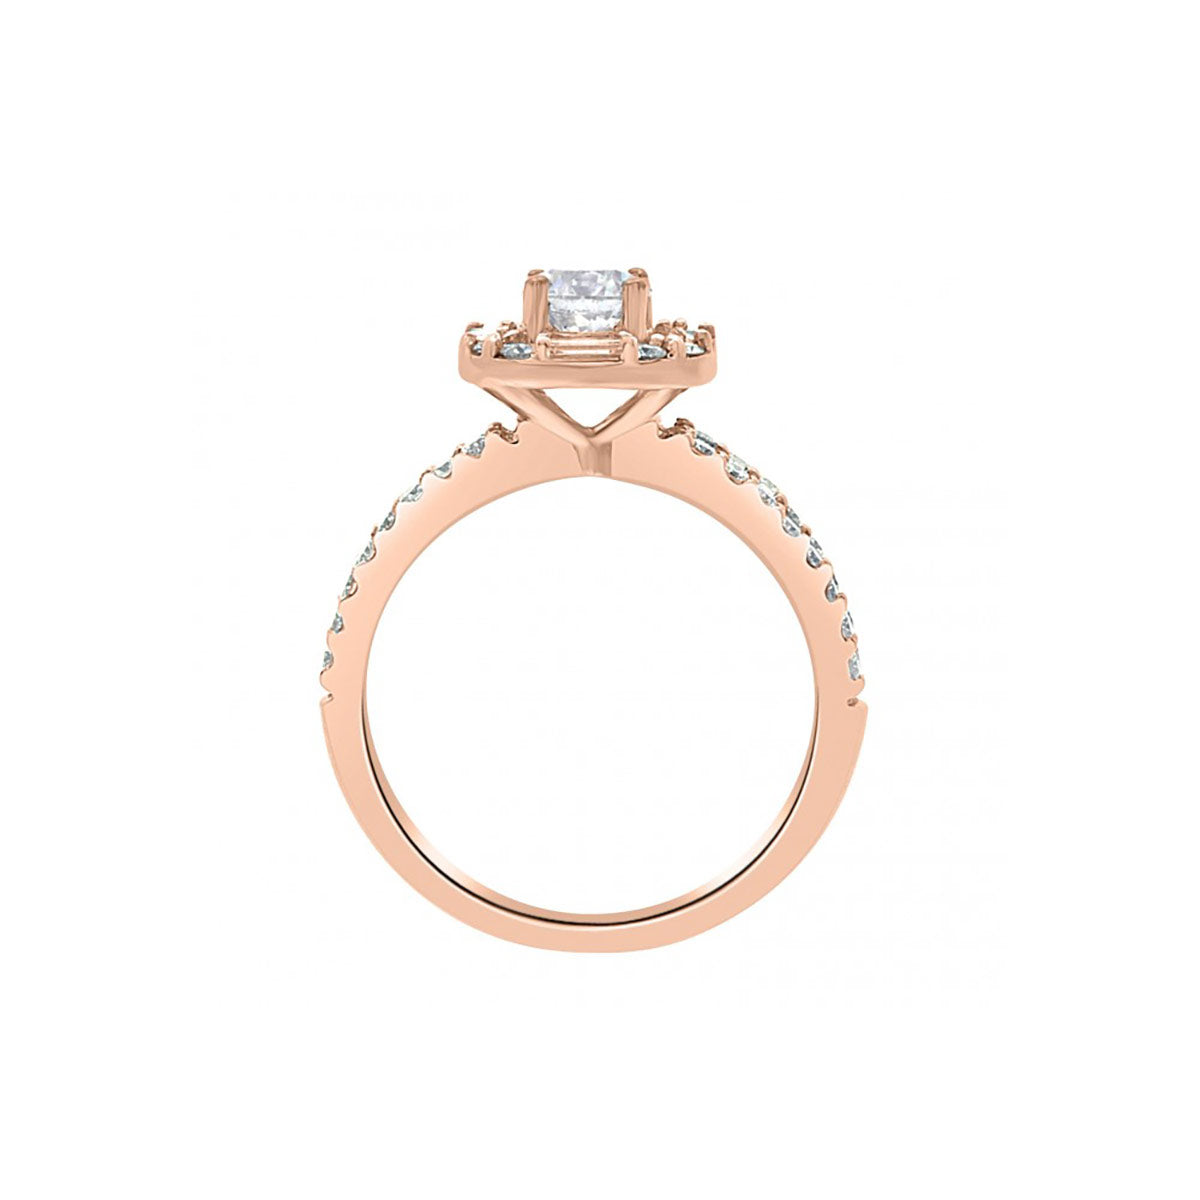 Baguette and Round Diamond Engagement Ring in rose gold standing vertical